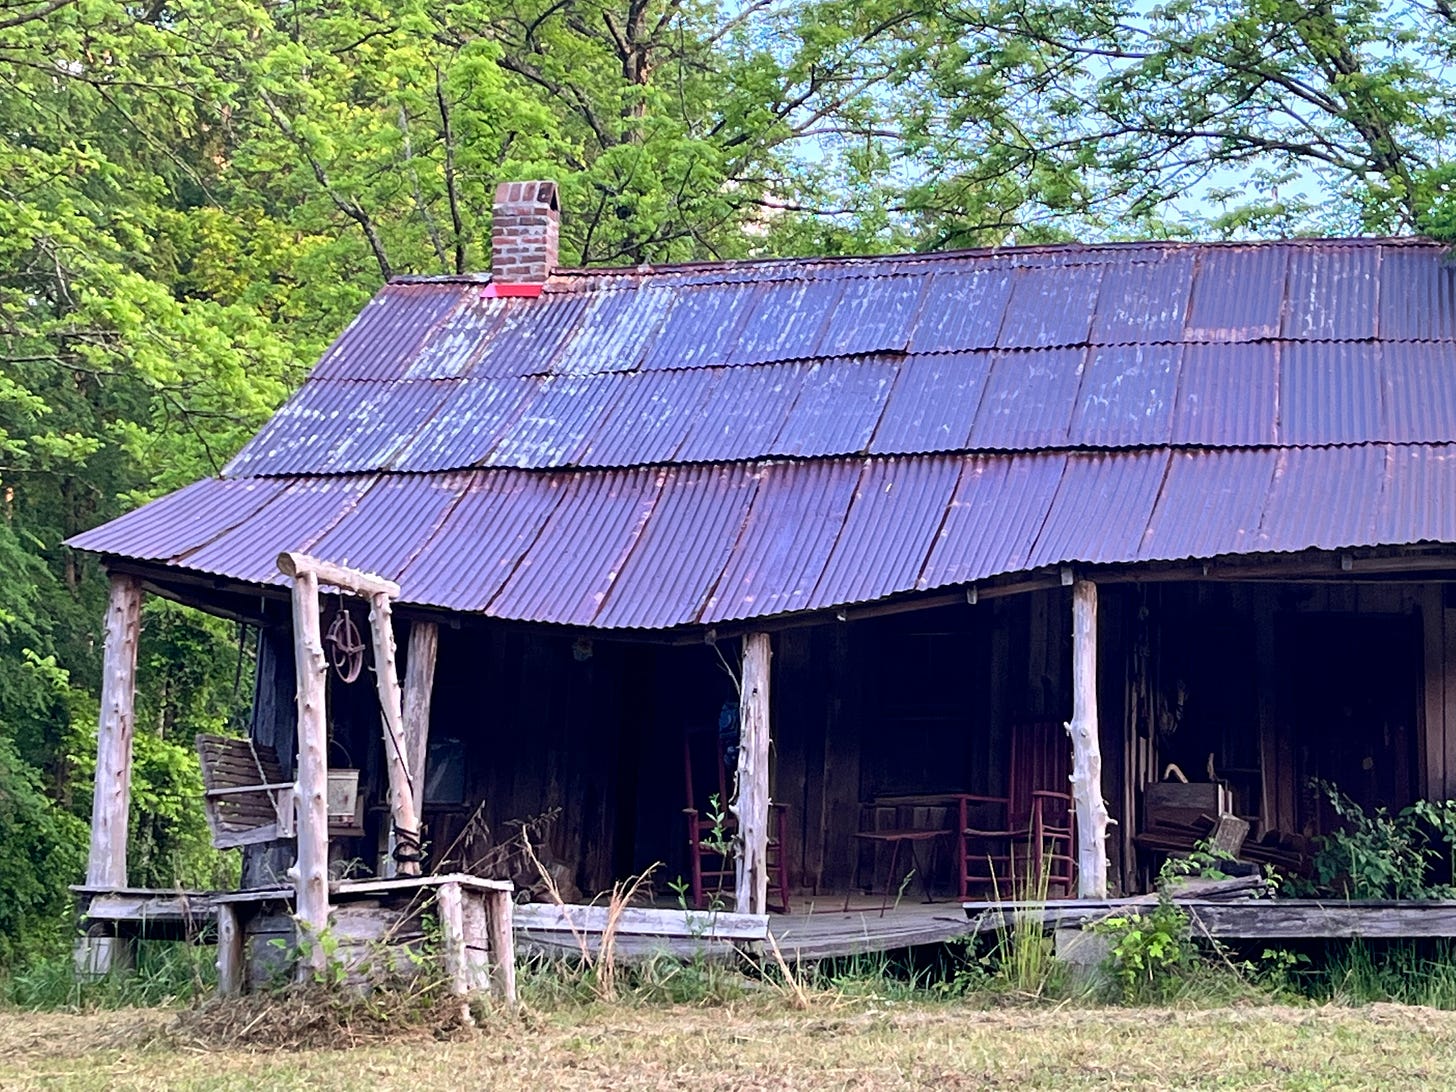 Image of an old shack on the side of the road, with a dropping rusted corrugated steel roof, and several old chairs in the shadows.